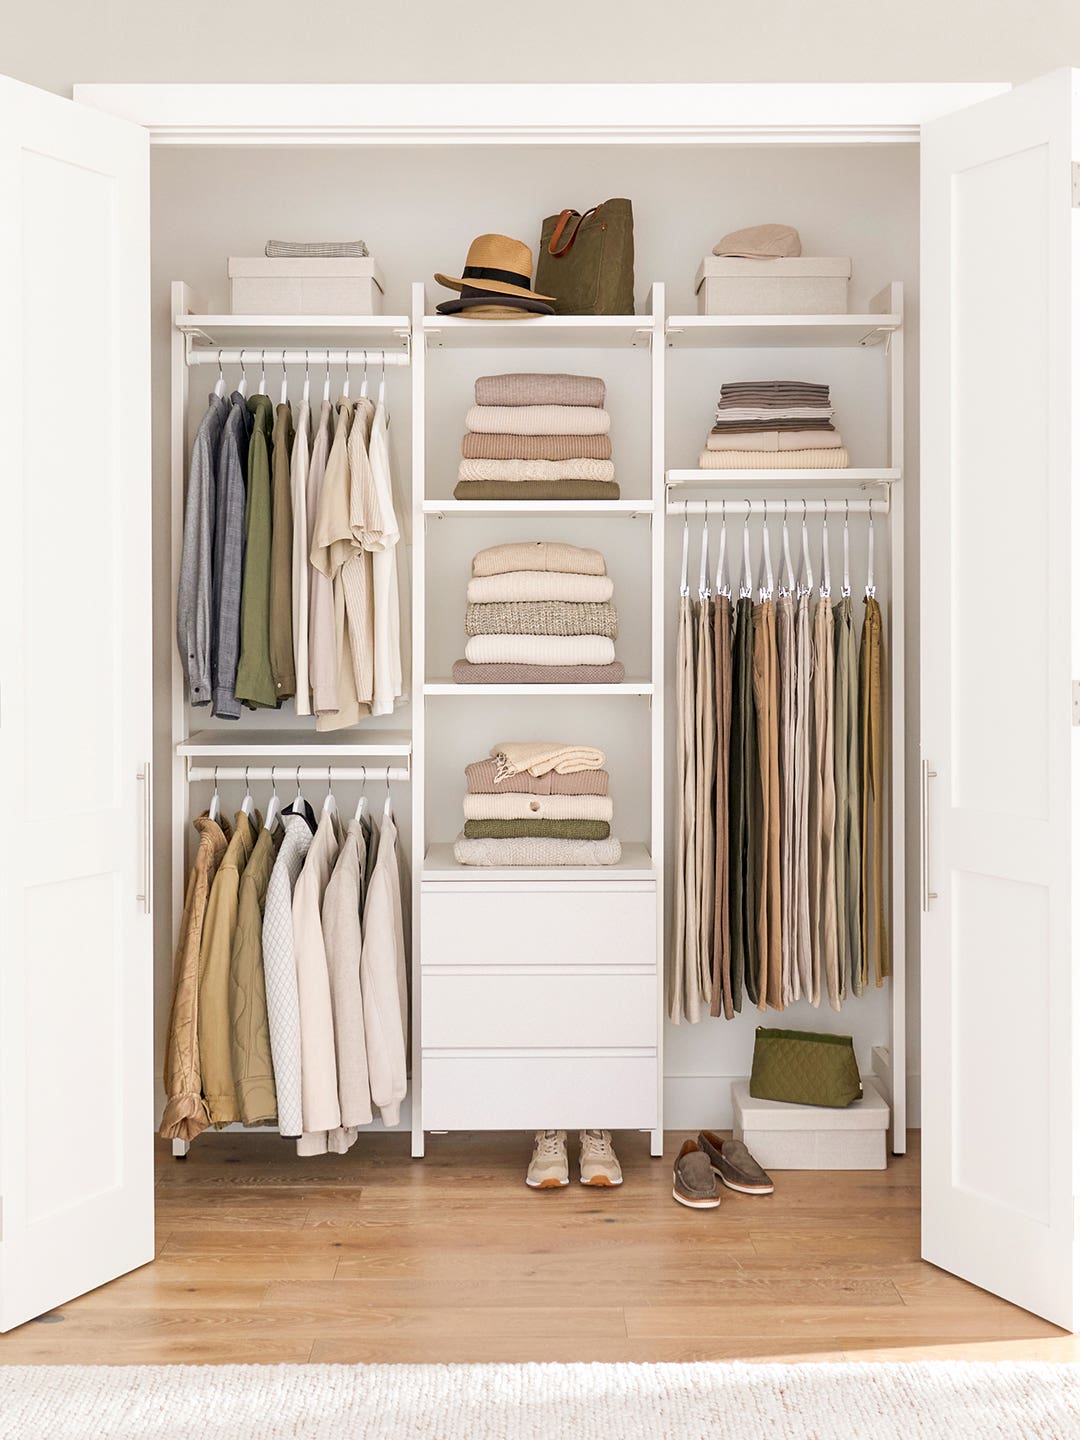 https://www.domino.com/uploads/2023/04/12/00-FEATURE-Pottery-Barn-Hold-Everything-Closet-Review-domino.jpg?auto=webp&optimize=high&crop=3:4,smart